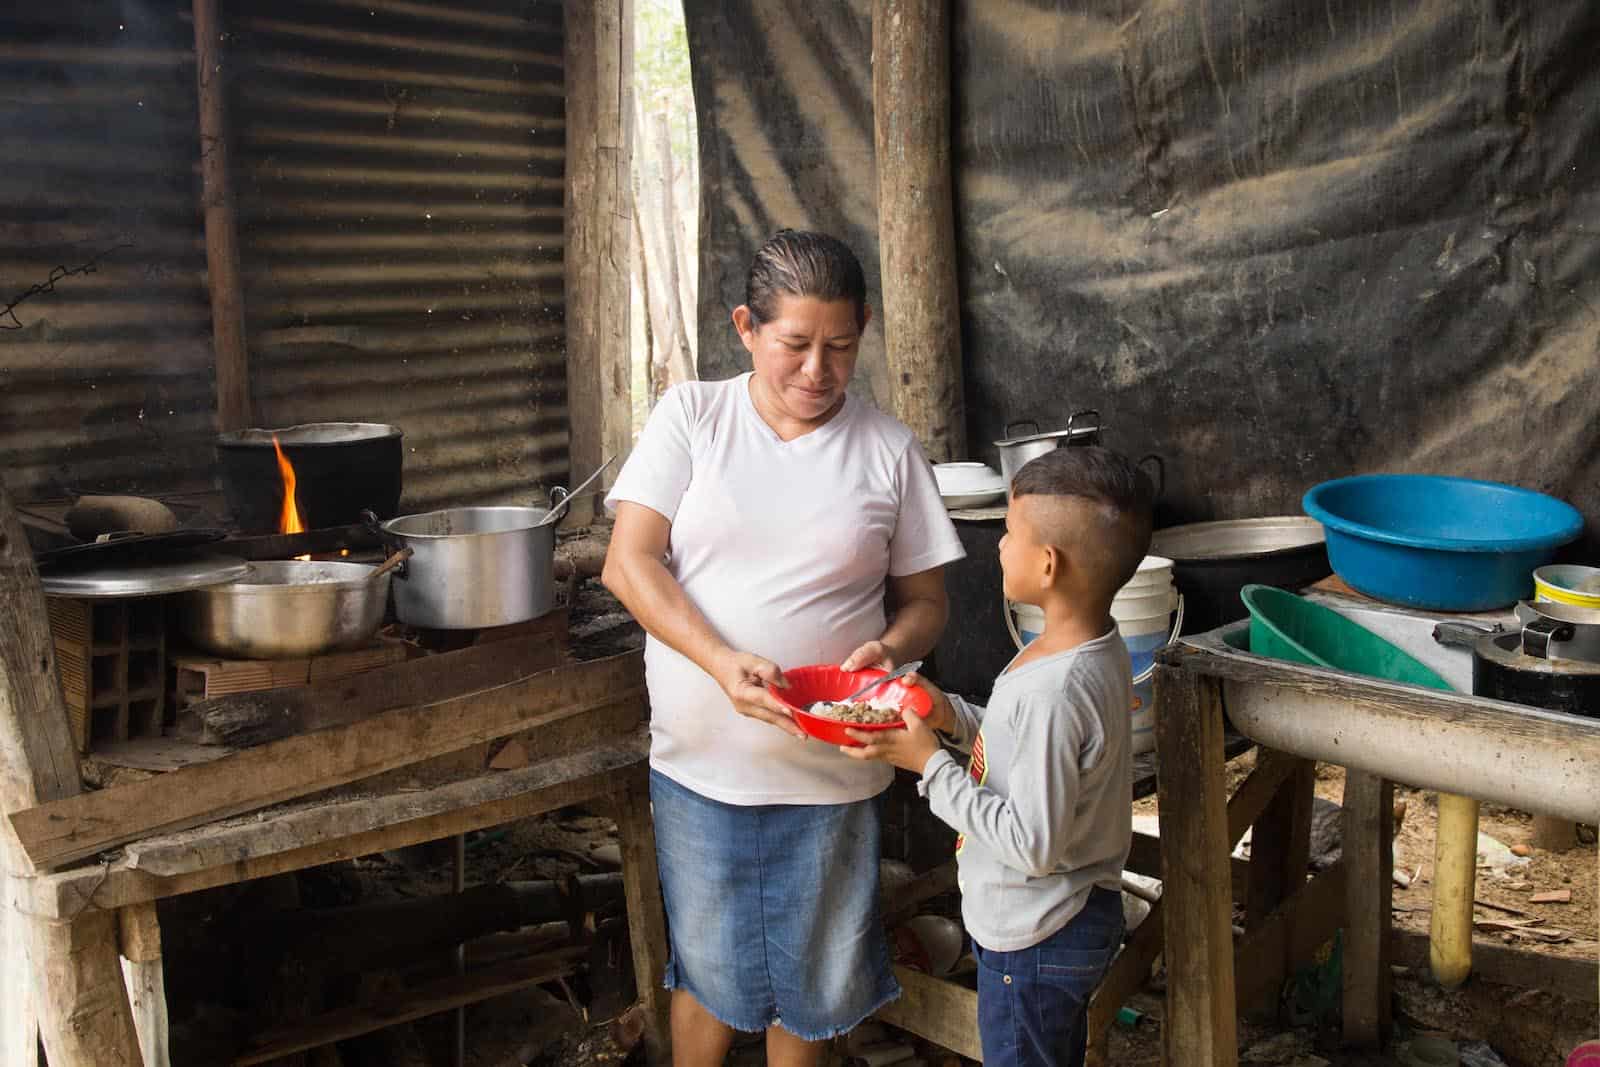 A woman stands in a kitchen handing a bowl of food to a boy.